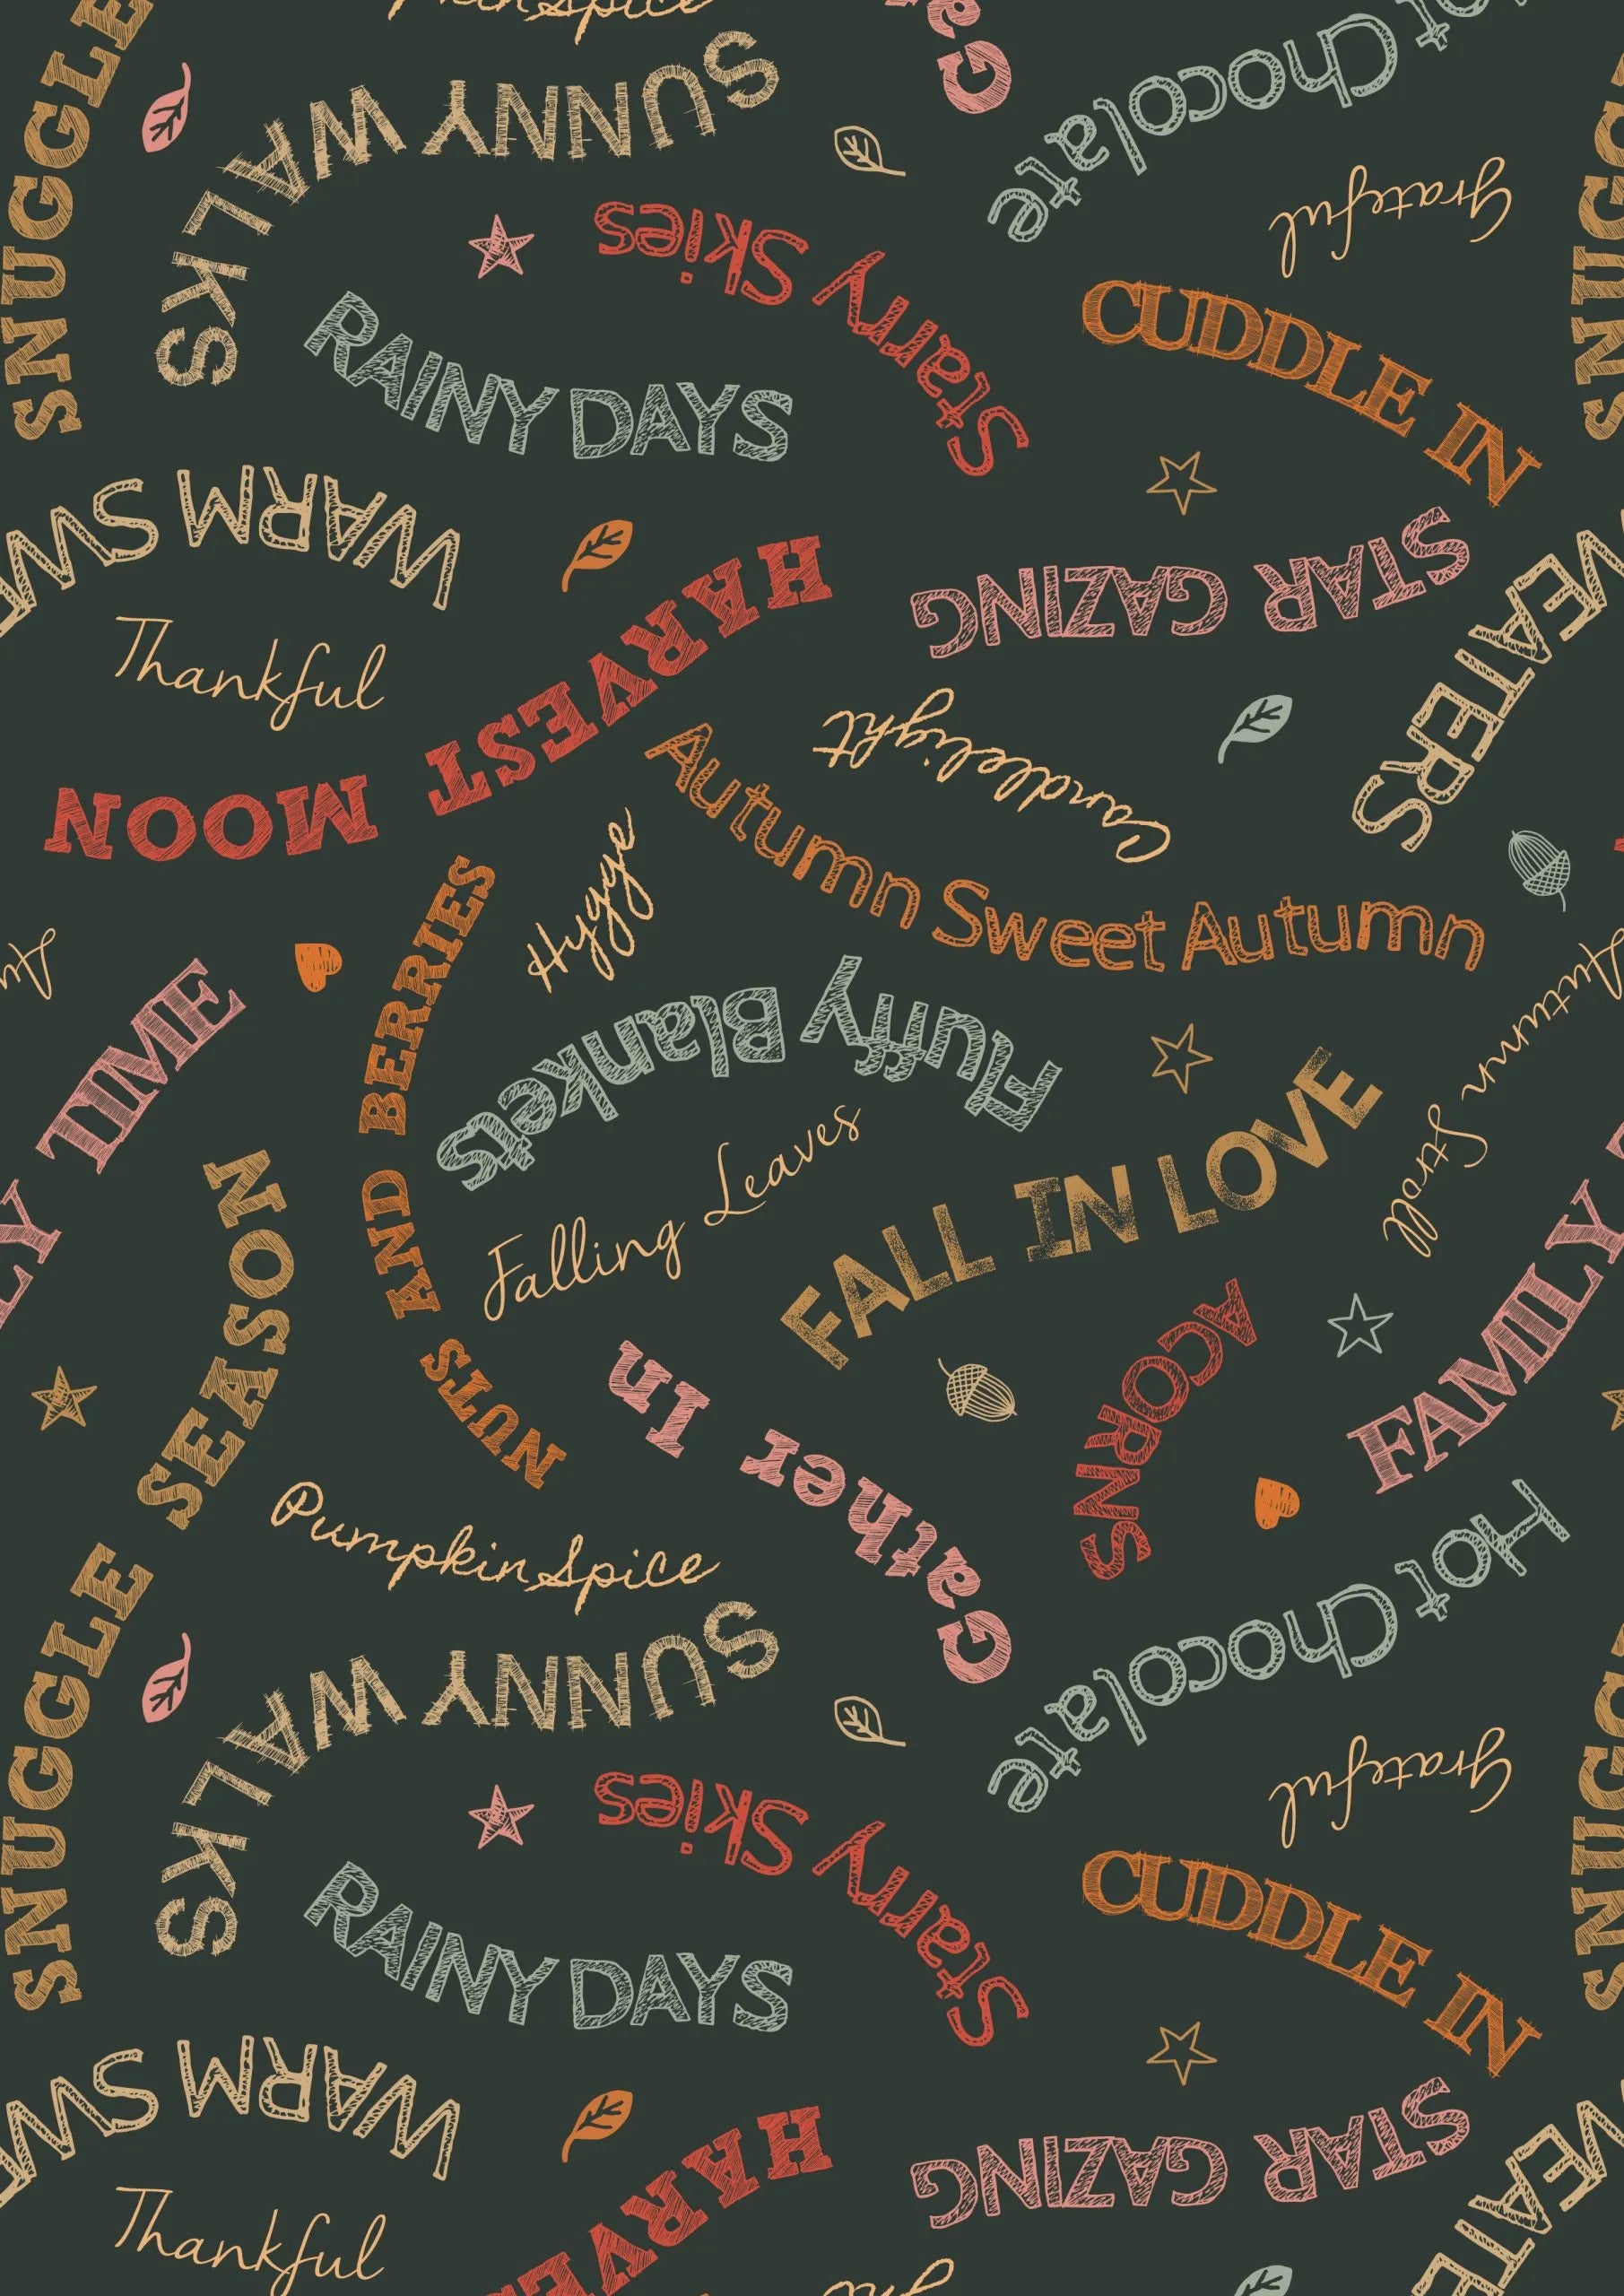 Snuggle Season Quilt Fabric - Cozy Words on Dark Forest Green - A684.3